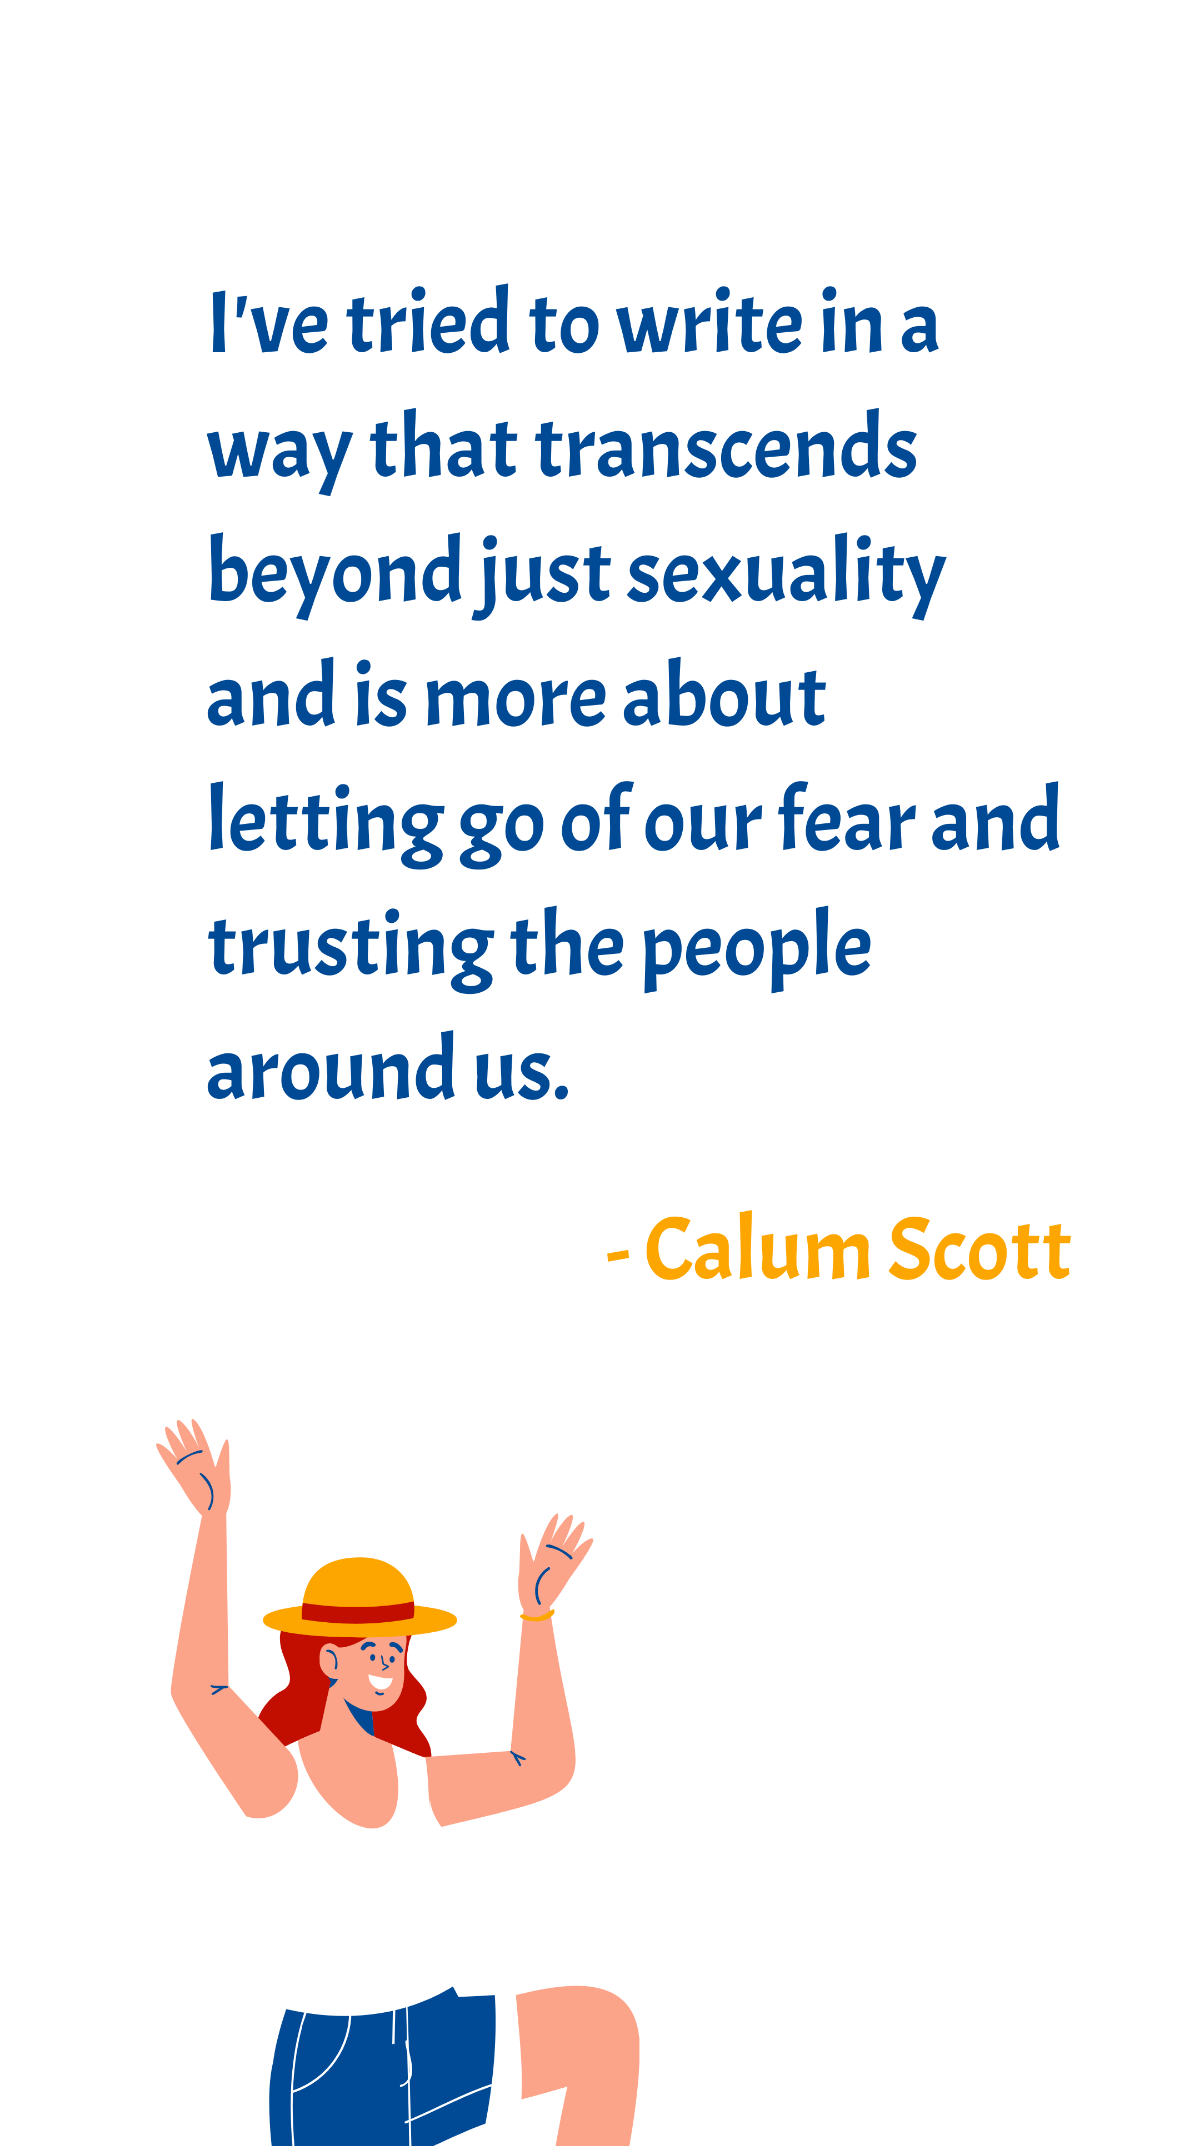 Calum Scott - I've tried to write in a way that transcends beyond just sexuality and is more about letting go of our fear and trusting the people around us. Template